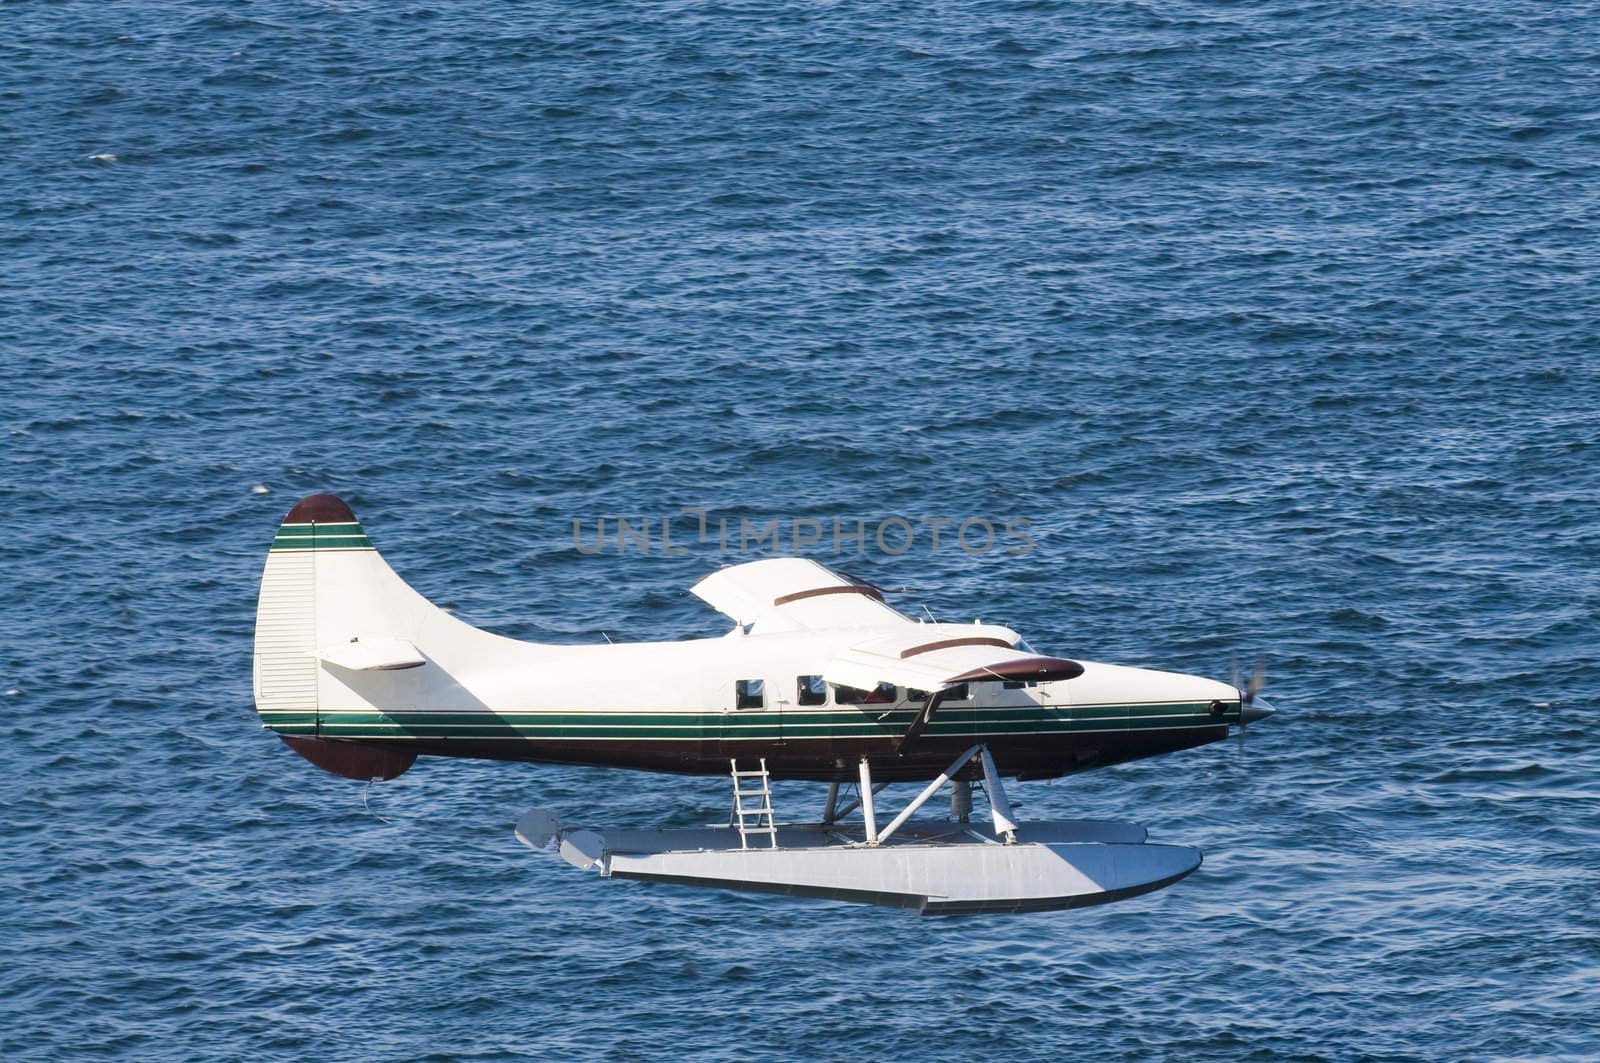 Seaplane coming in to land by jeffbanke